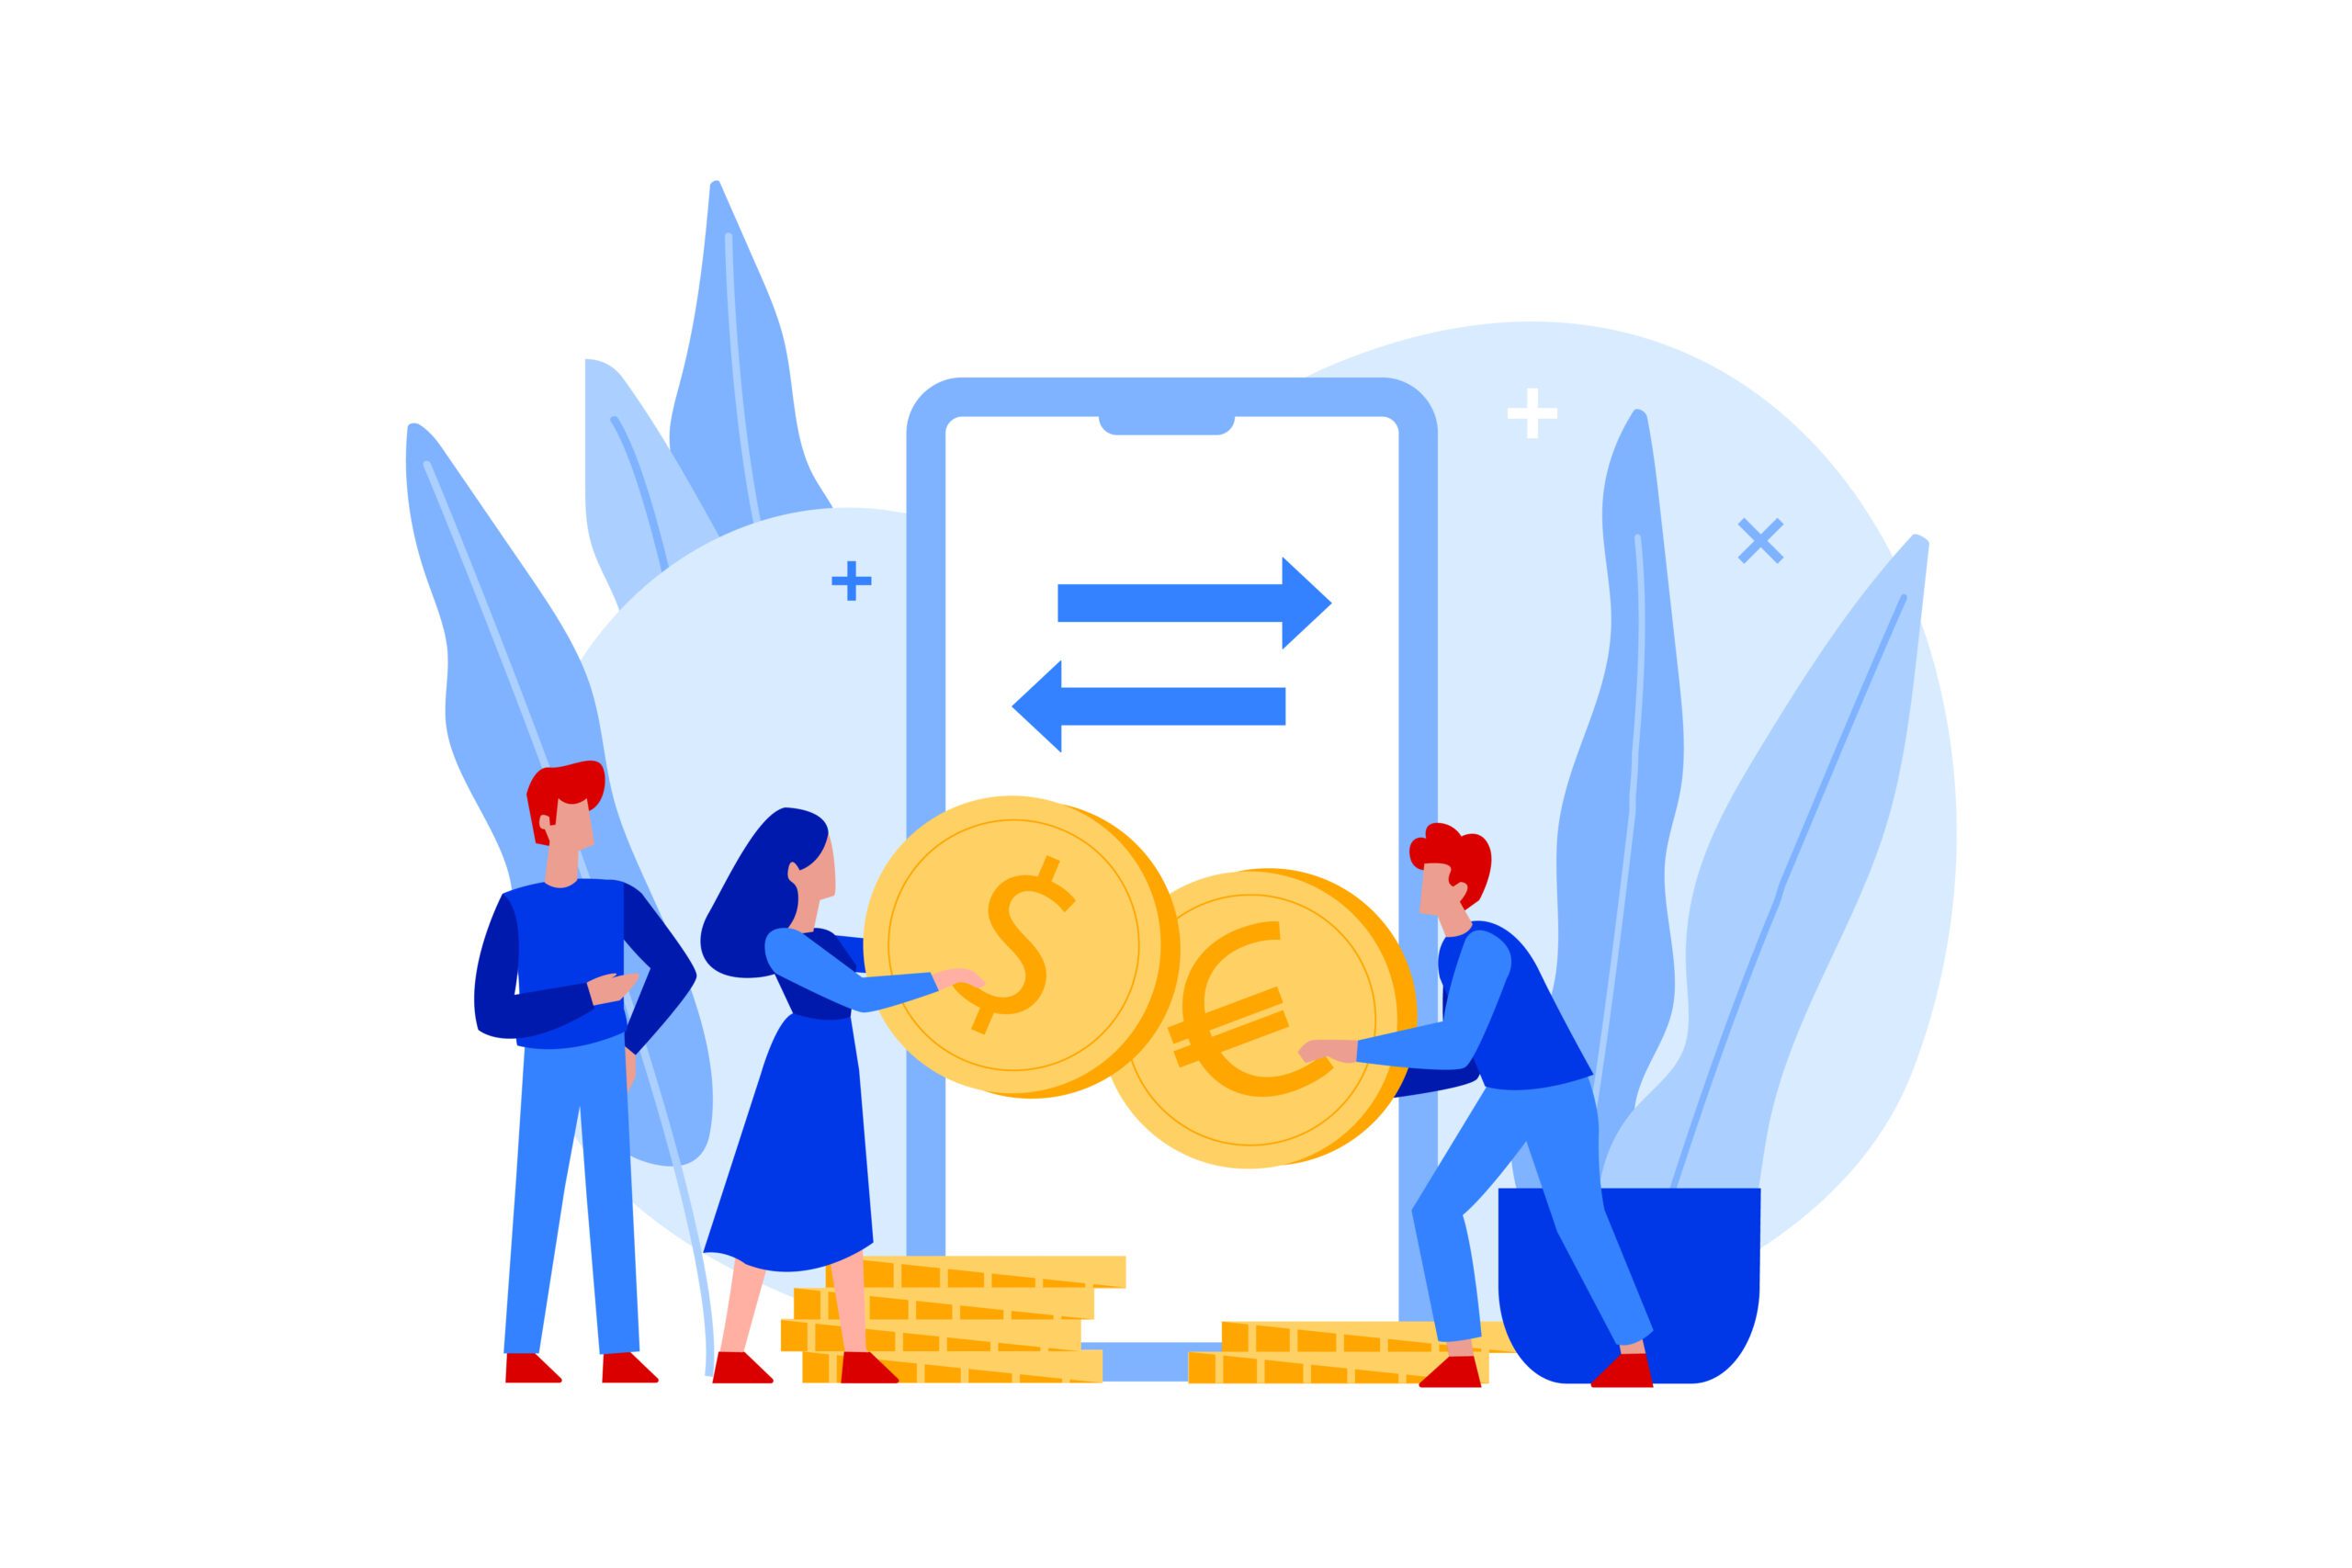 Flat people holding euro and dollar coins in hands. Characters currency exchange or converter. Online money transfer or mobile banking concept. Mobile applications for quickswap of foreign money.